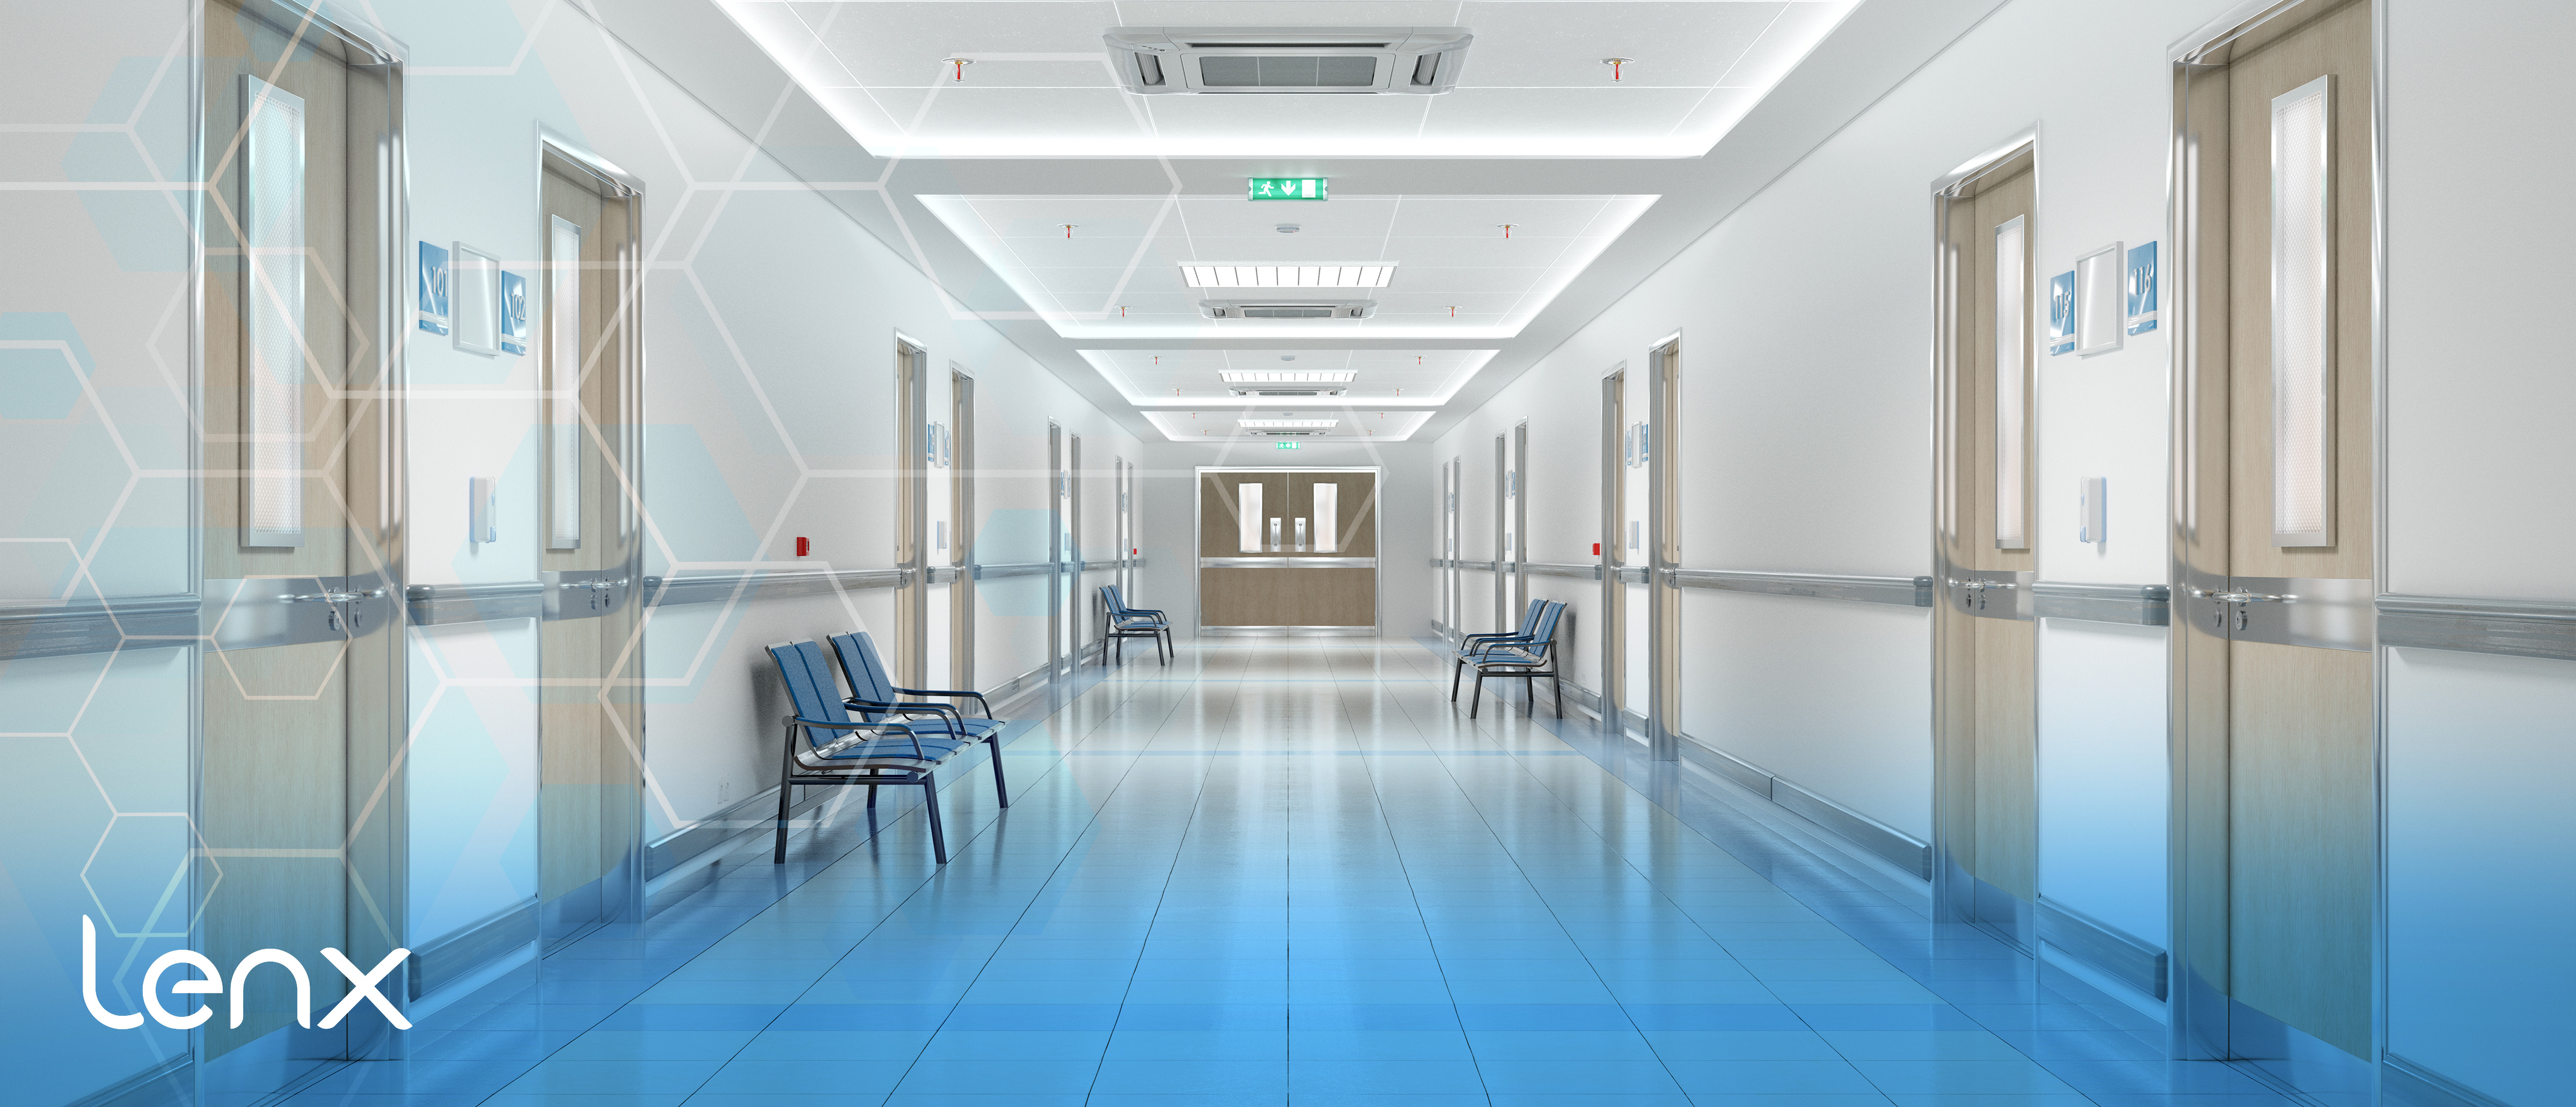 How AI Security, Active Shooter Detection Makes Securing Hospitals Simpler